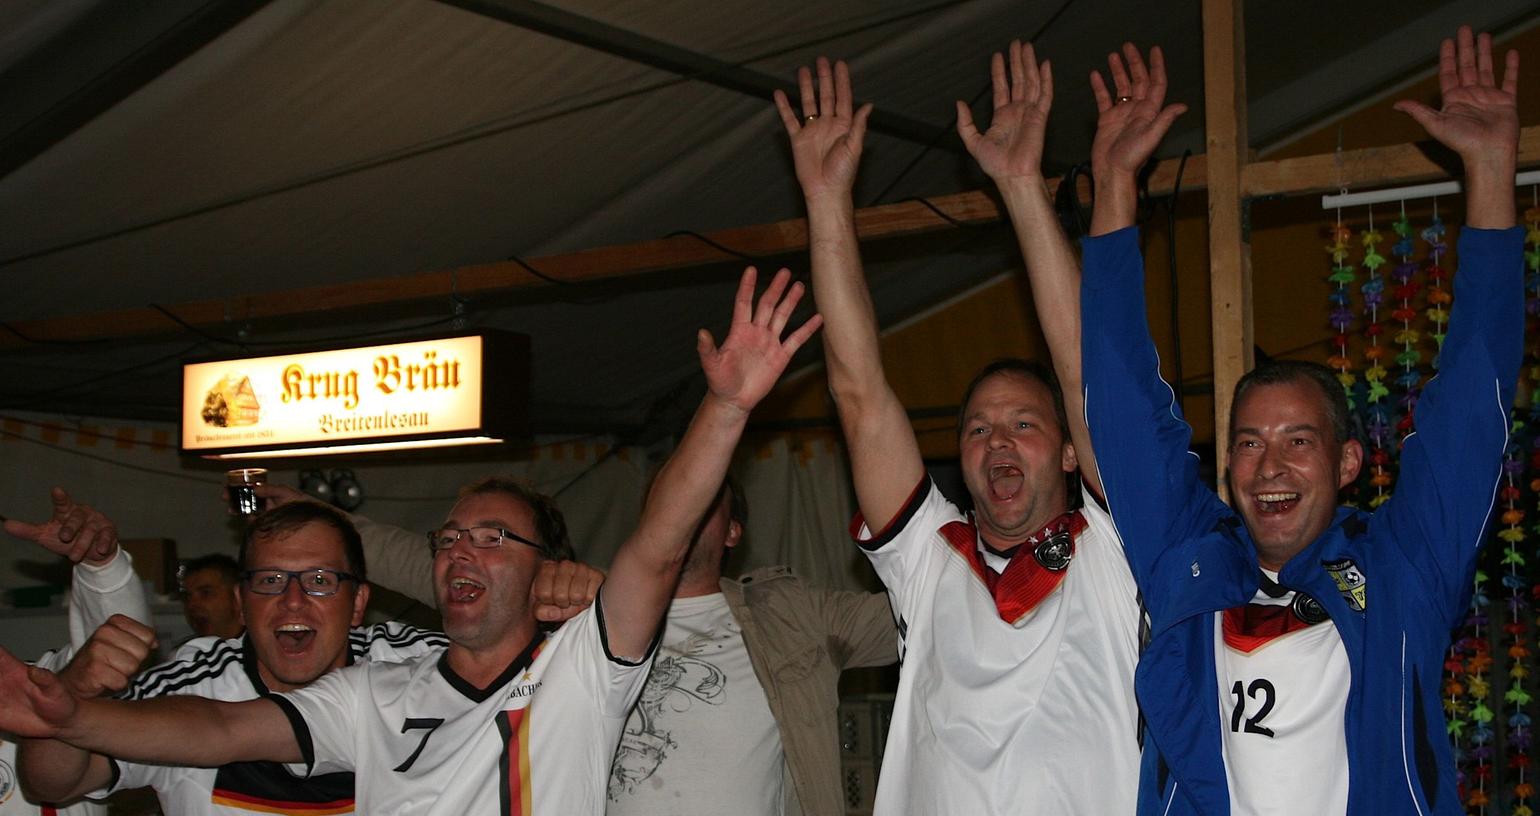 Weltmeister! In 